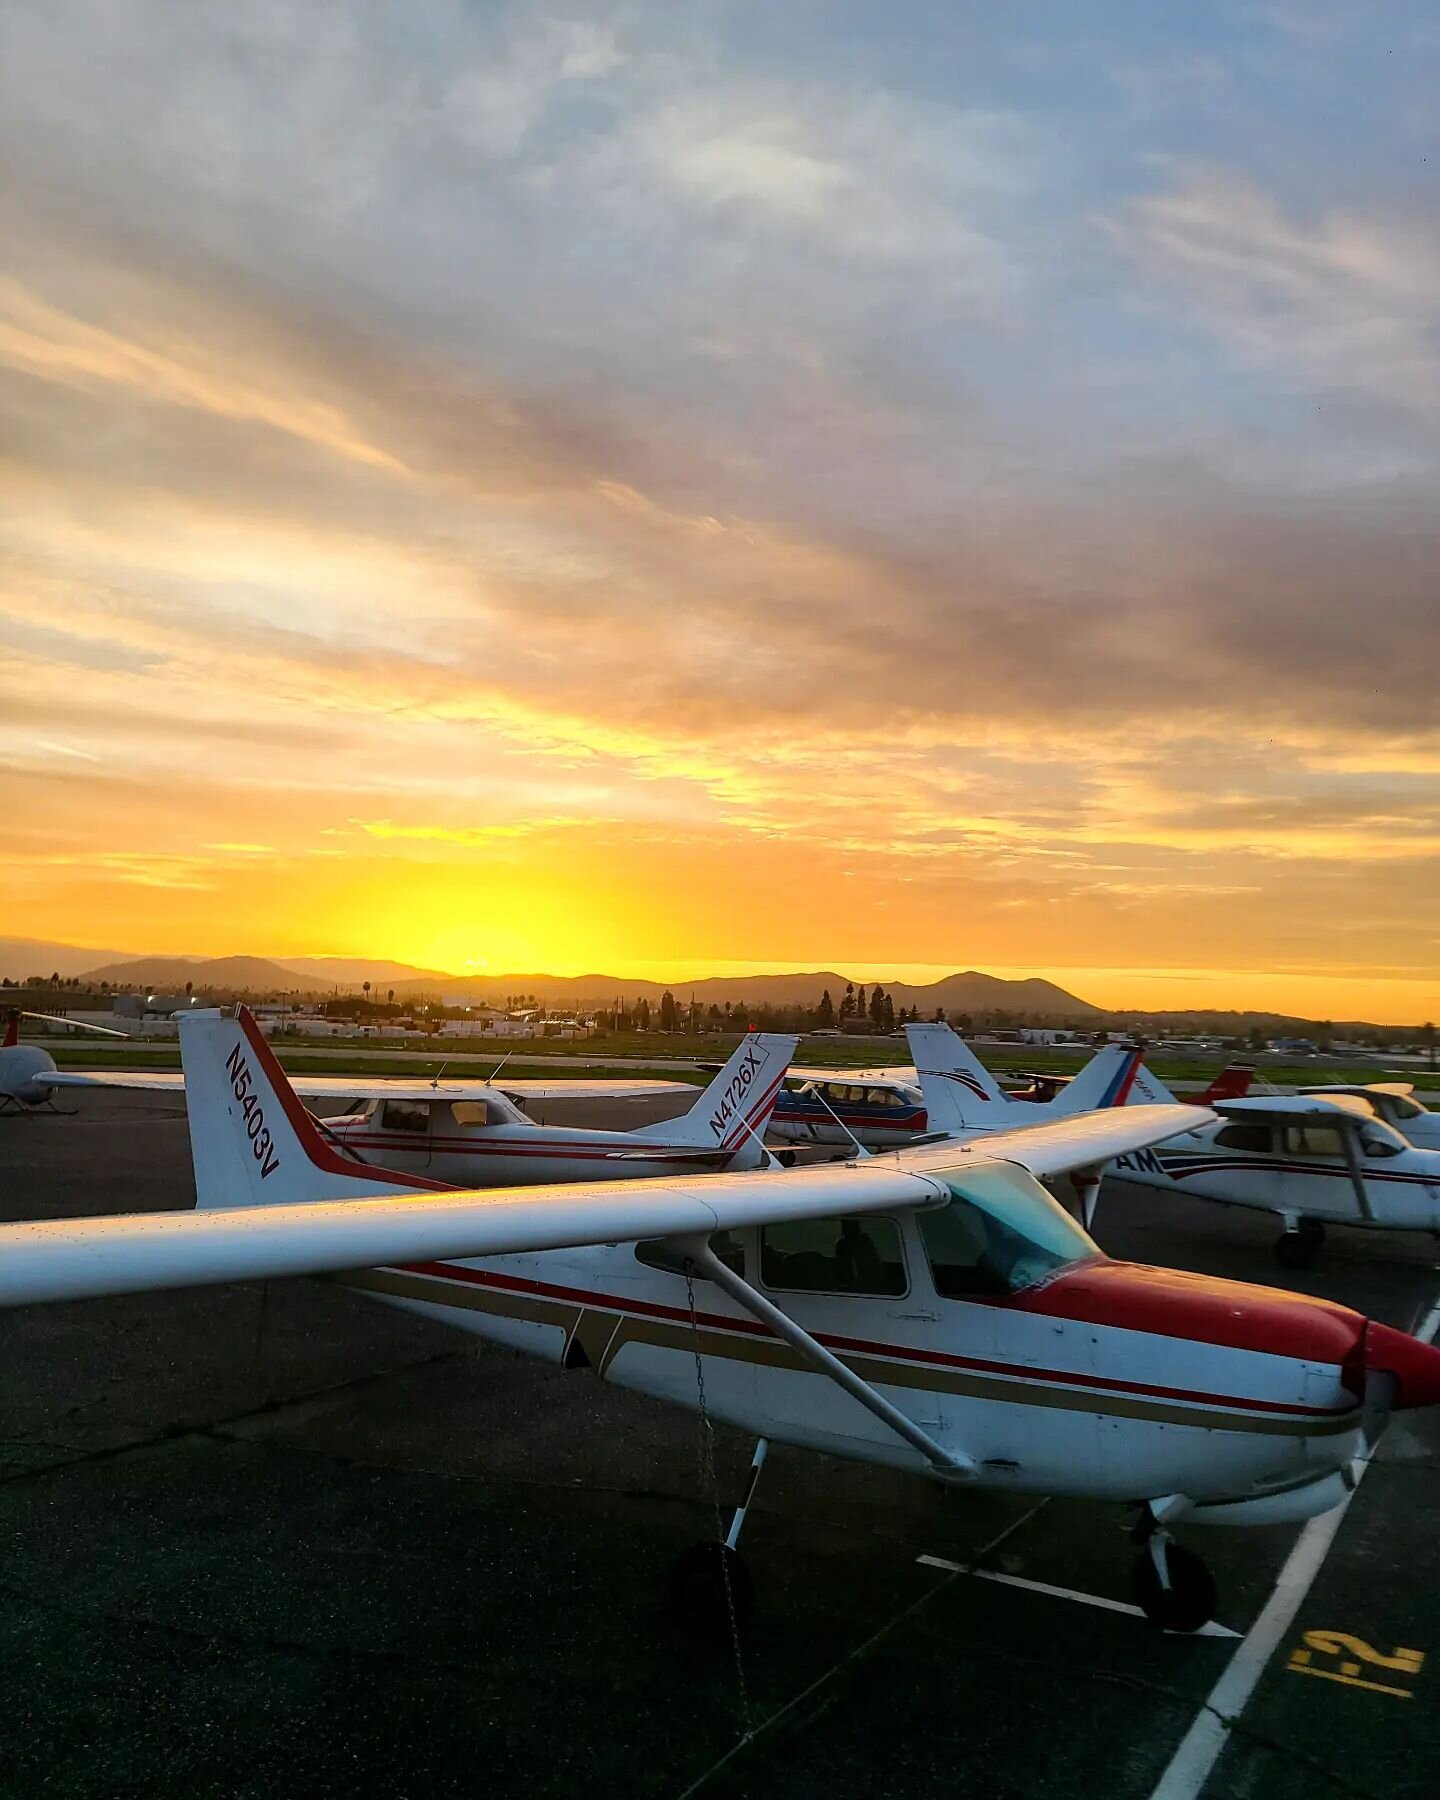 We don't get tired of the sunset here in SoCal. 😍🌄

#californiaaviationservices #flightschool #learntofly #asel #ppl #cessna172 #cessna #cessna150 #cessna172rg #riversidemunicipalairport #kral #airplane #amel #ifr #commercialpilot #instrumenttraini